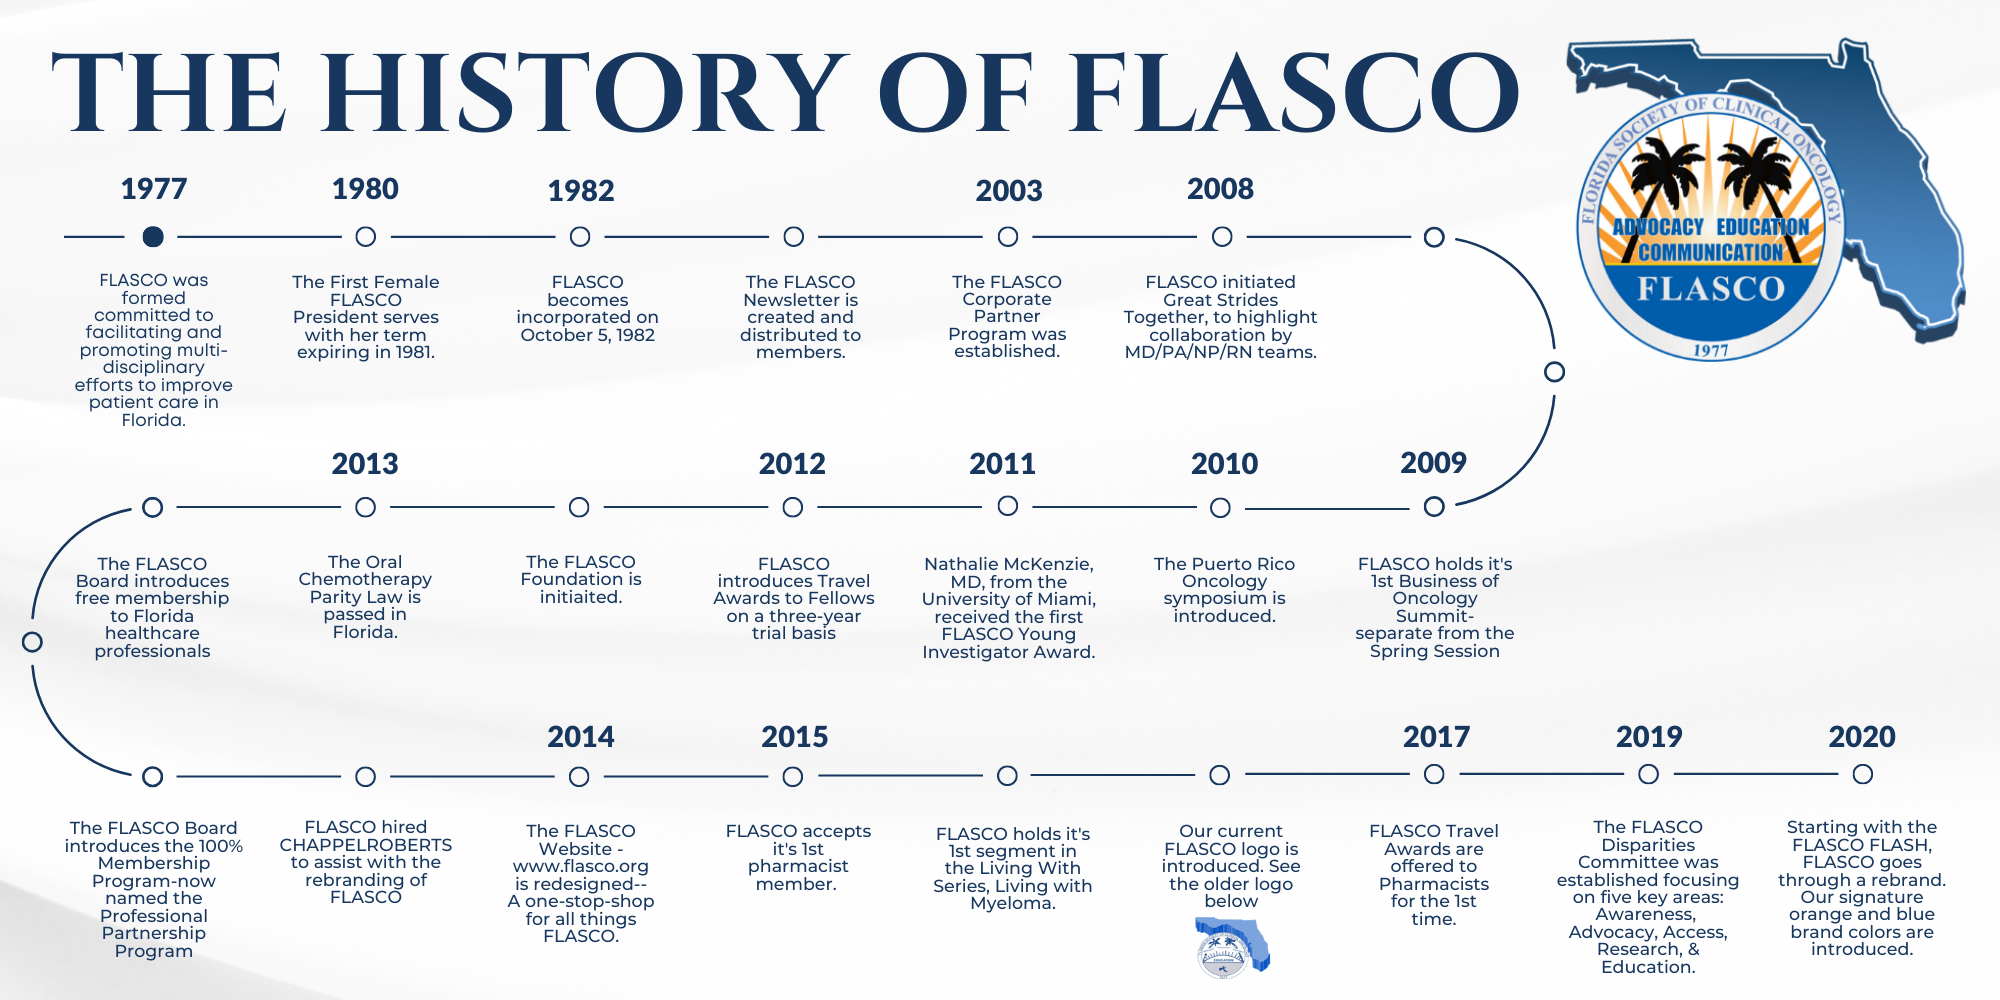 The History of FLASCO